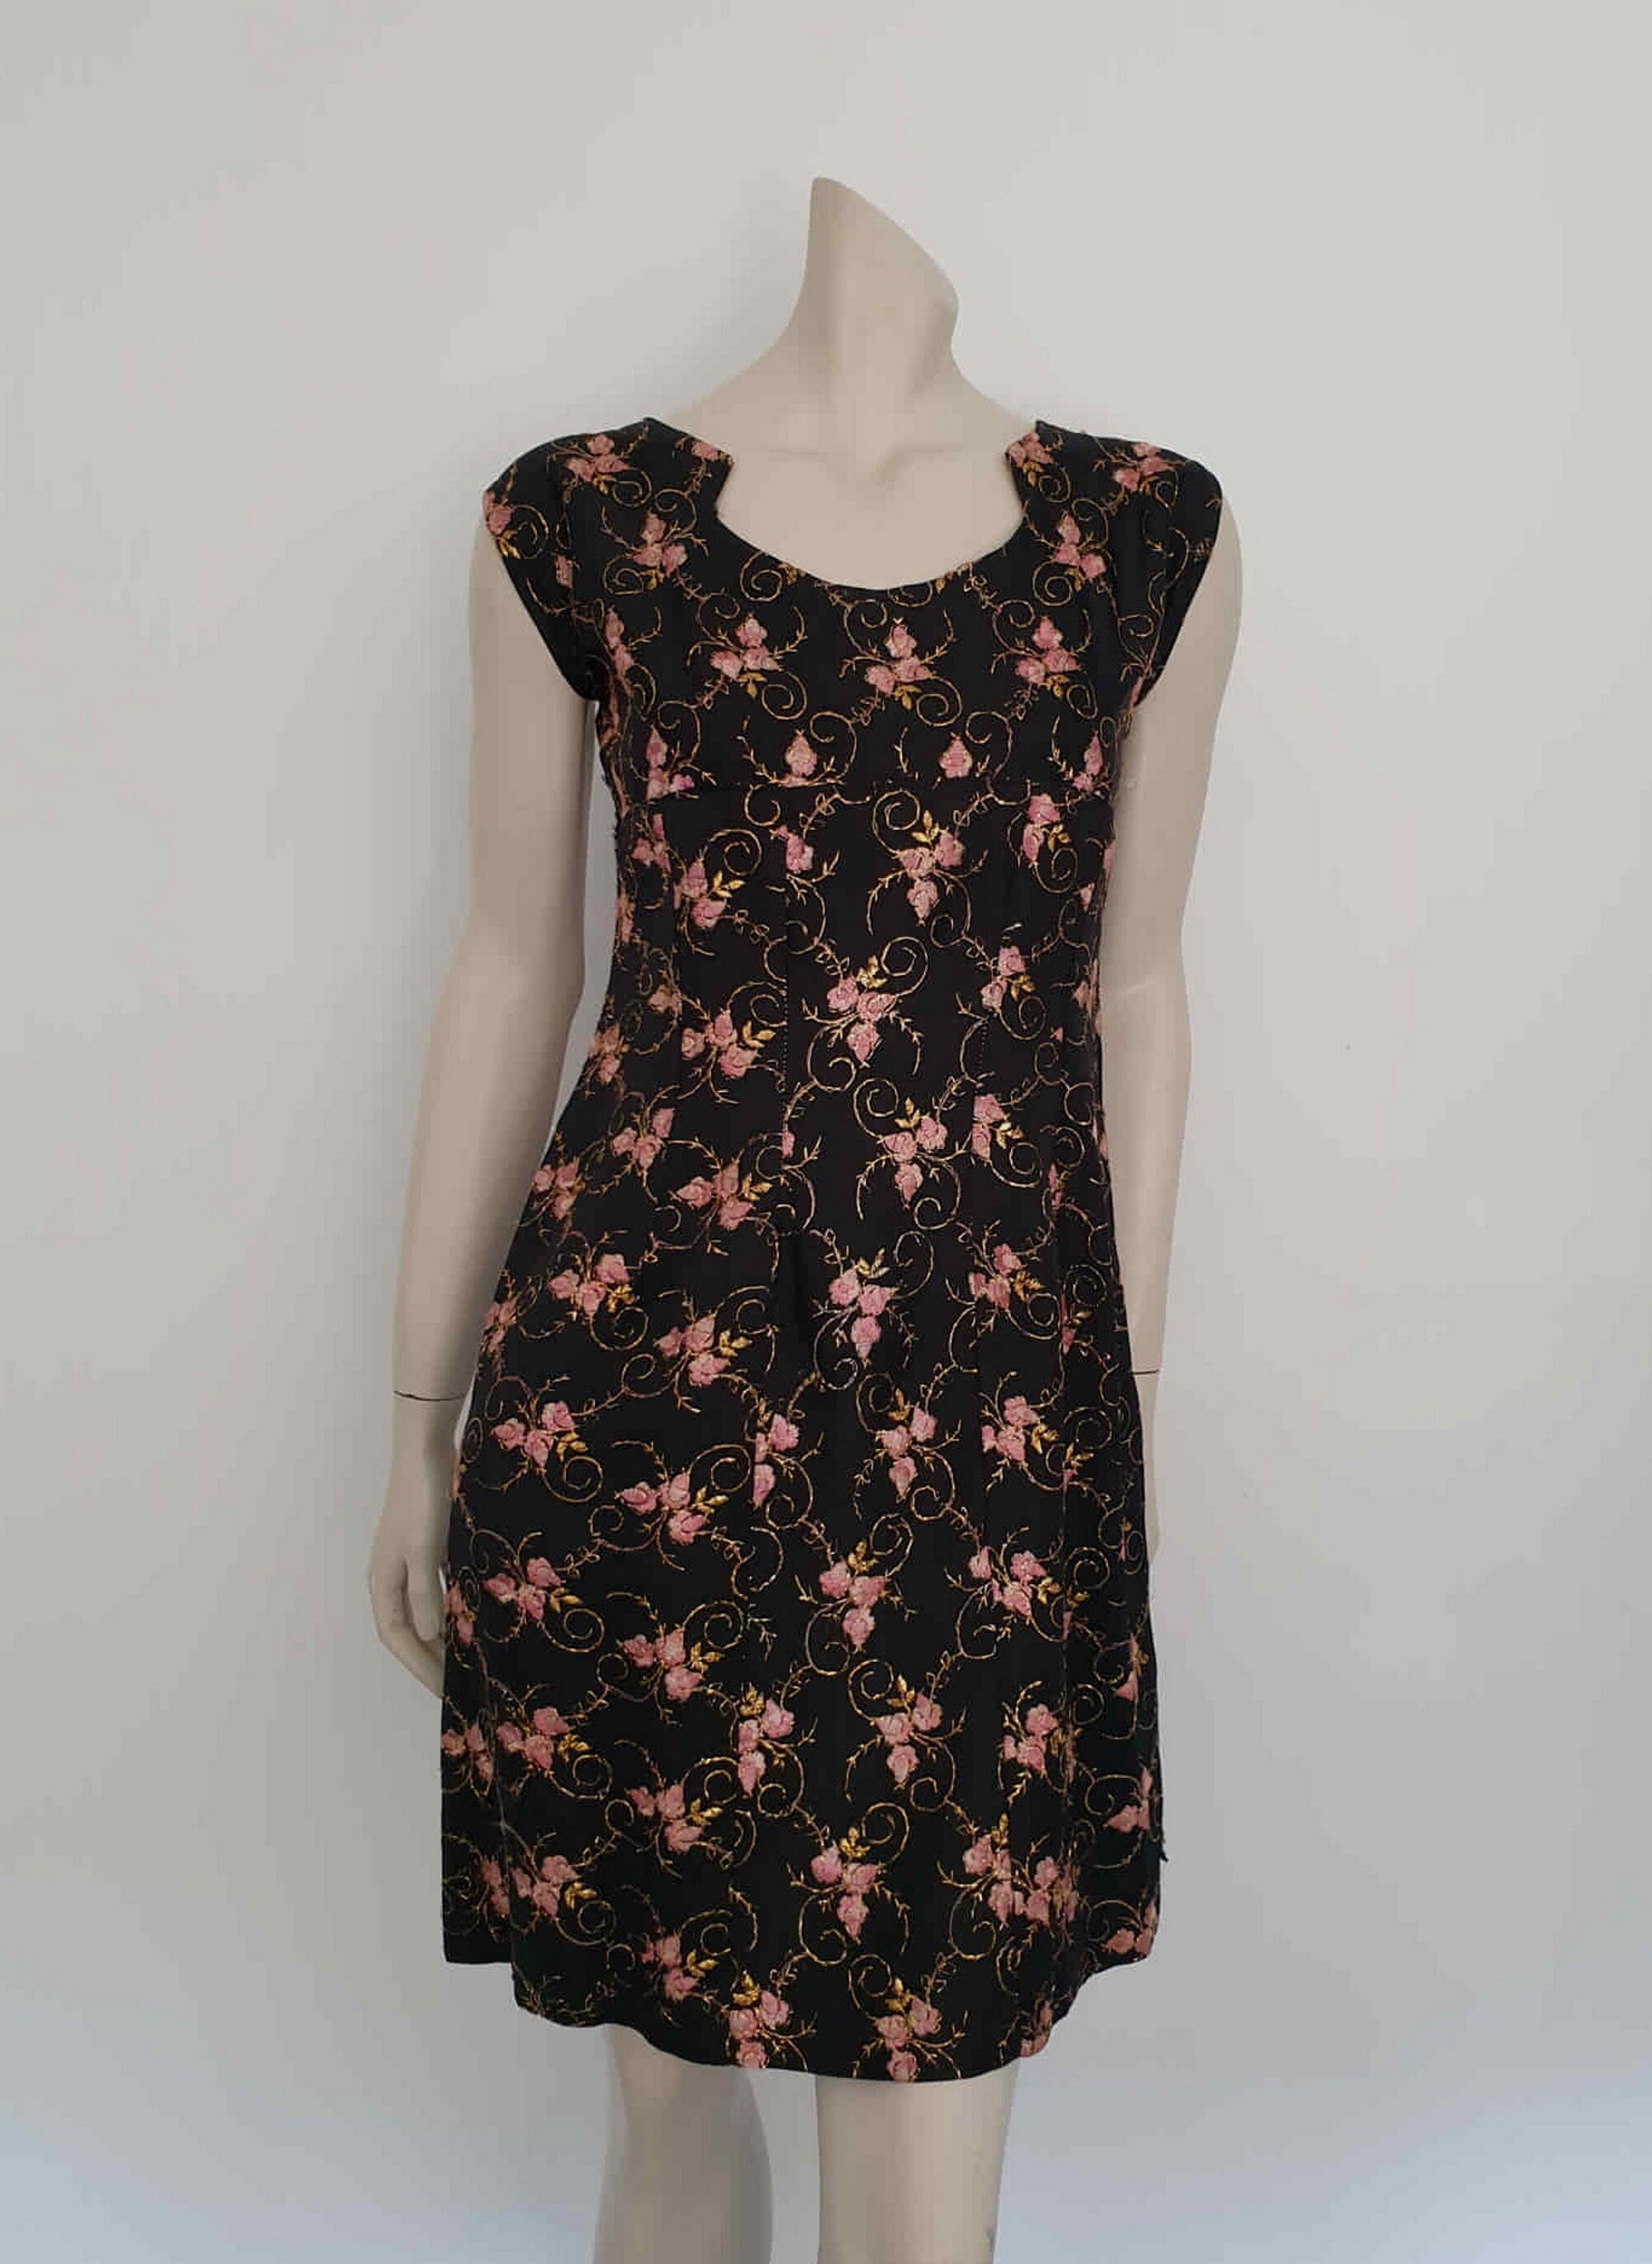 1960s vintage black and pink floral brocade dress with tinsel